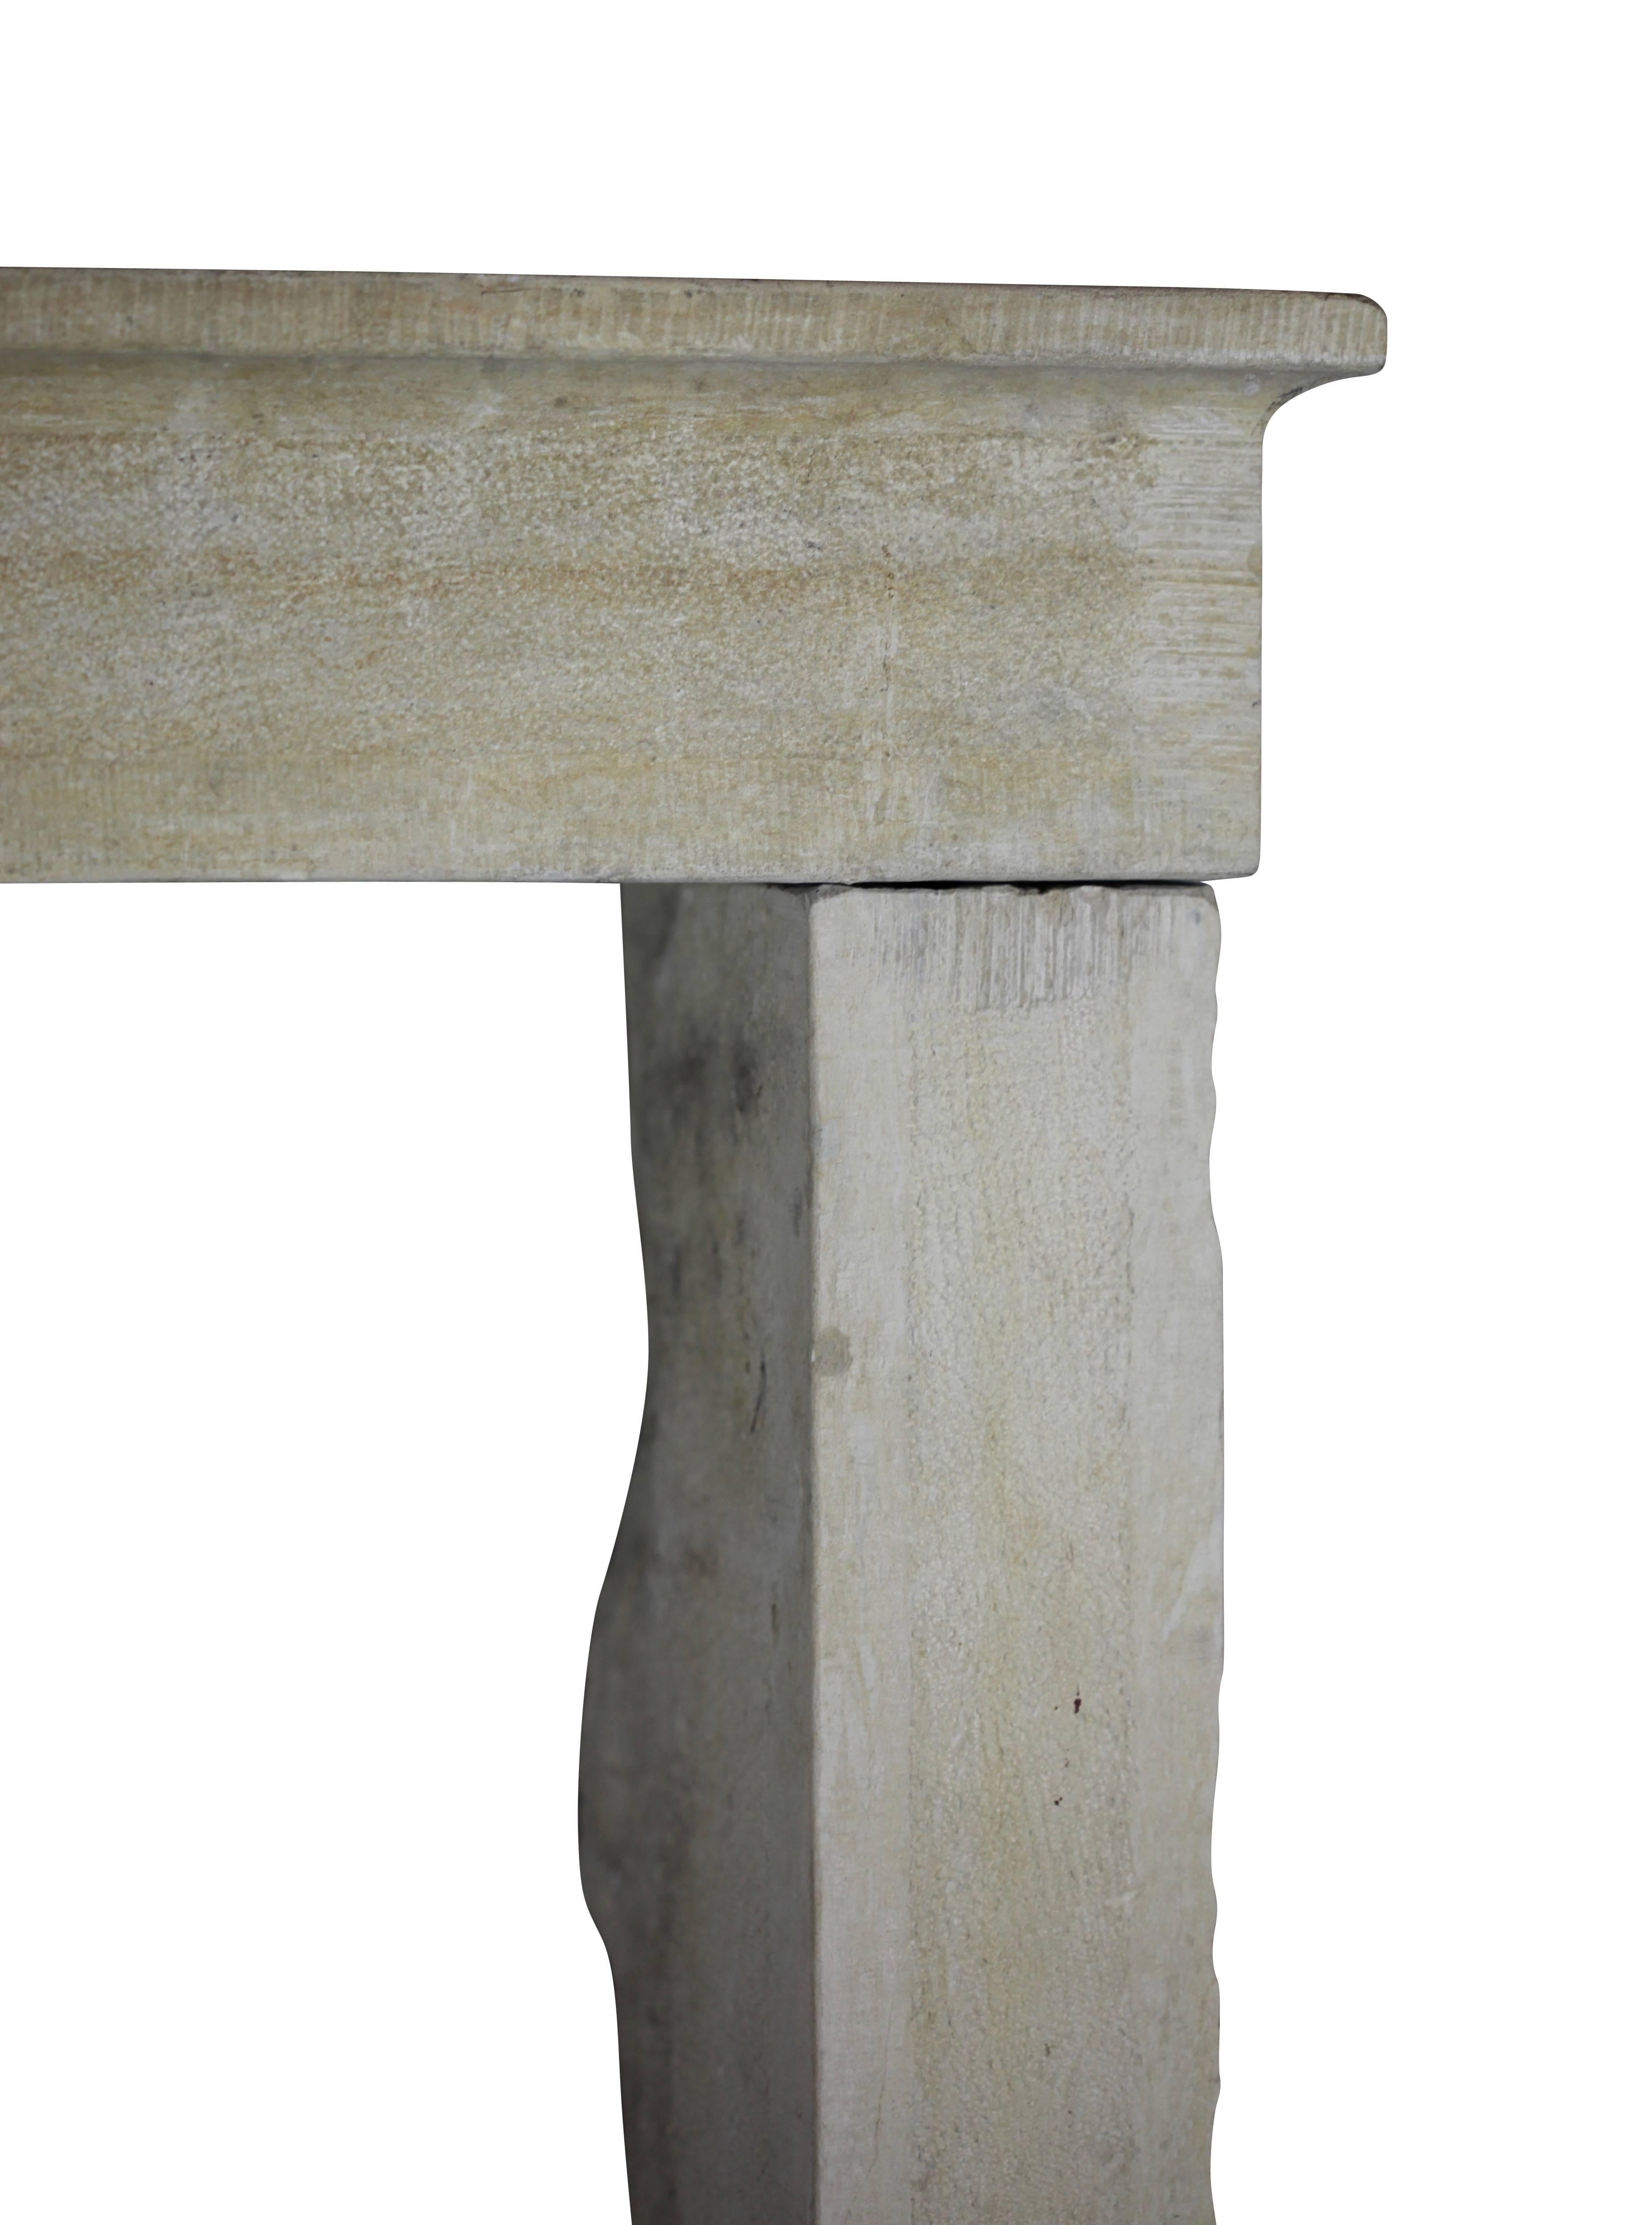 Carved 17th Century Rustic Limestone Antique Fireplace Mantel